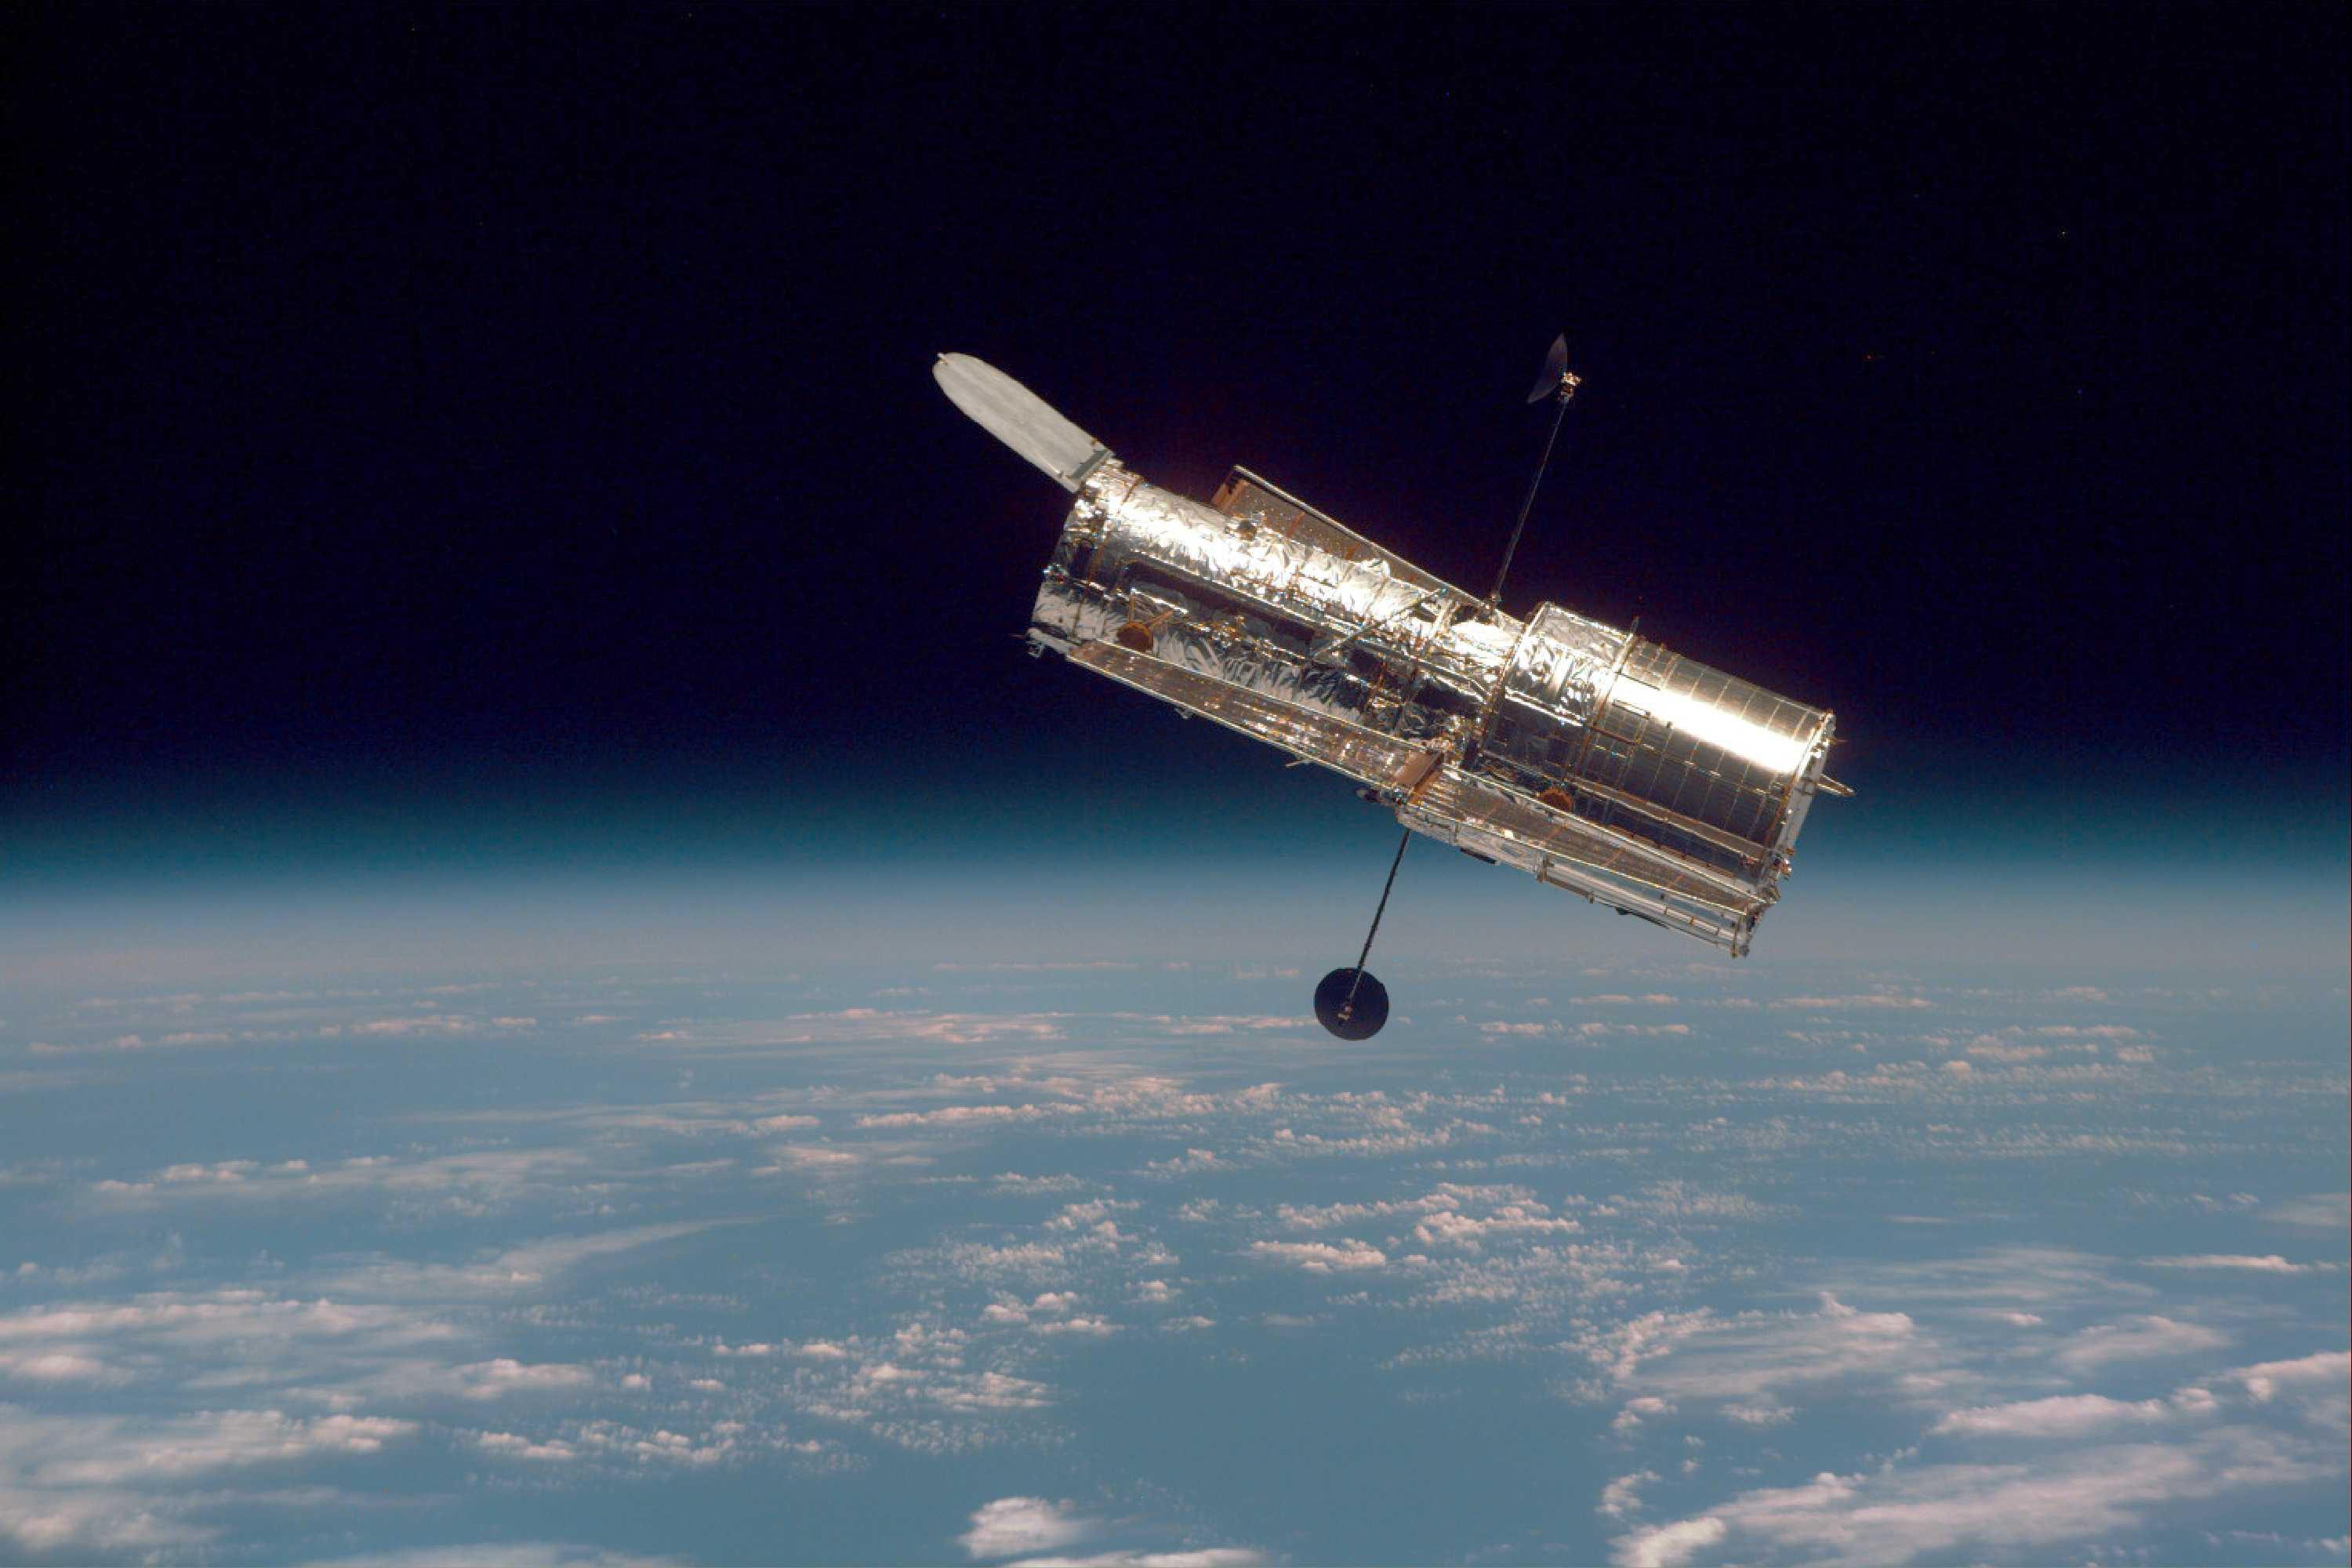 SpaceX is studying the possibility of boosting the Hubble Space Telescope's altitude to extend its lifespan, NASA invites interested companies to participate in the study